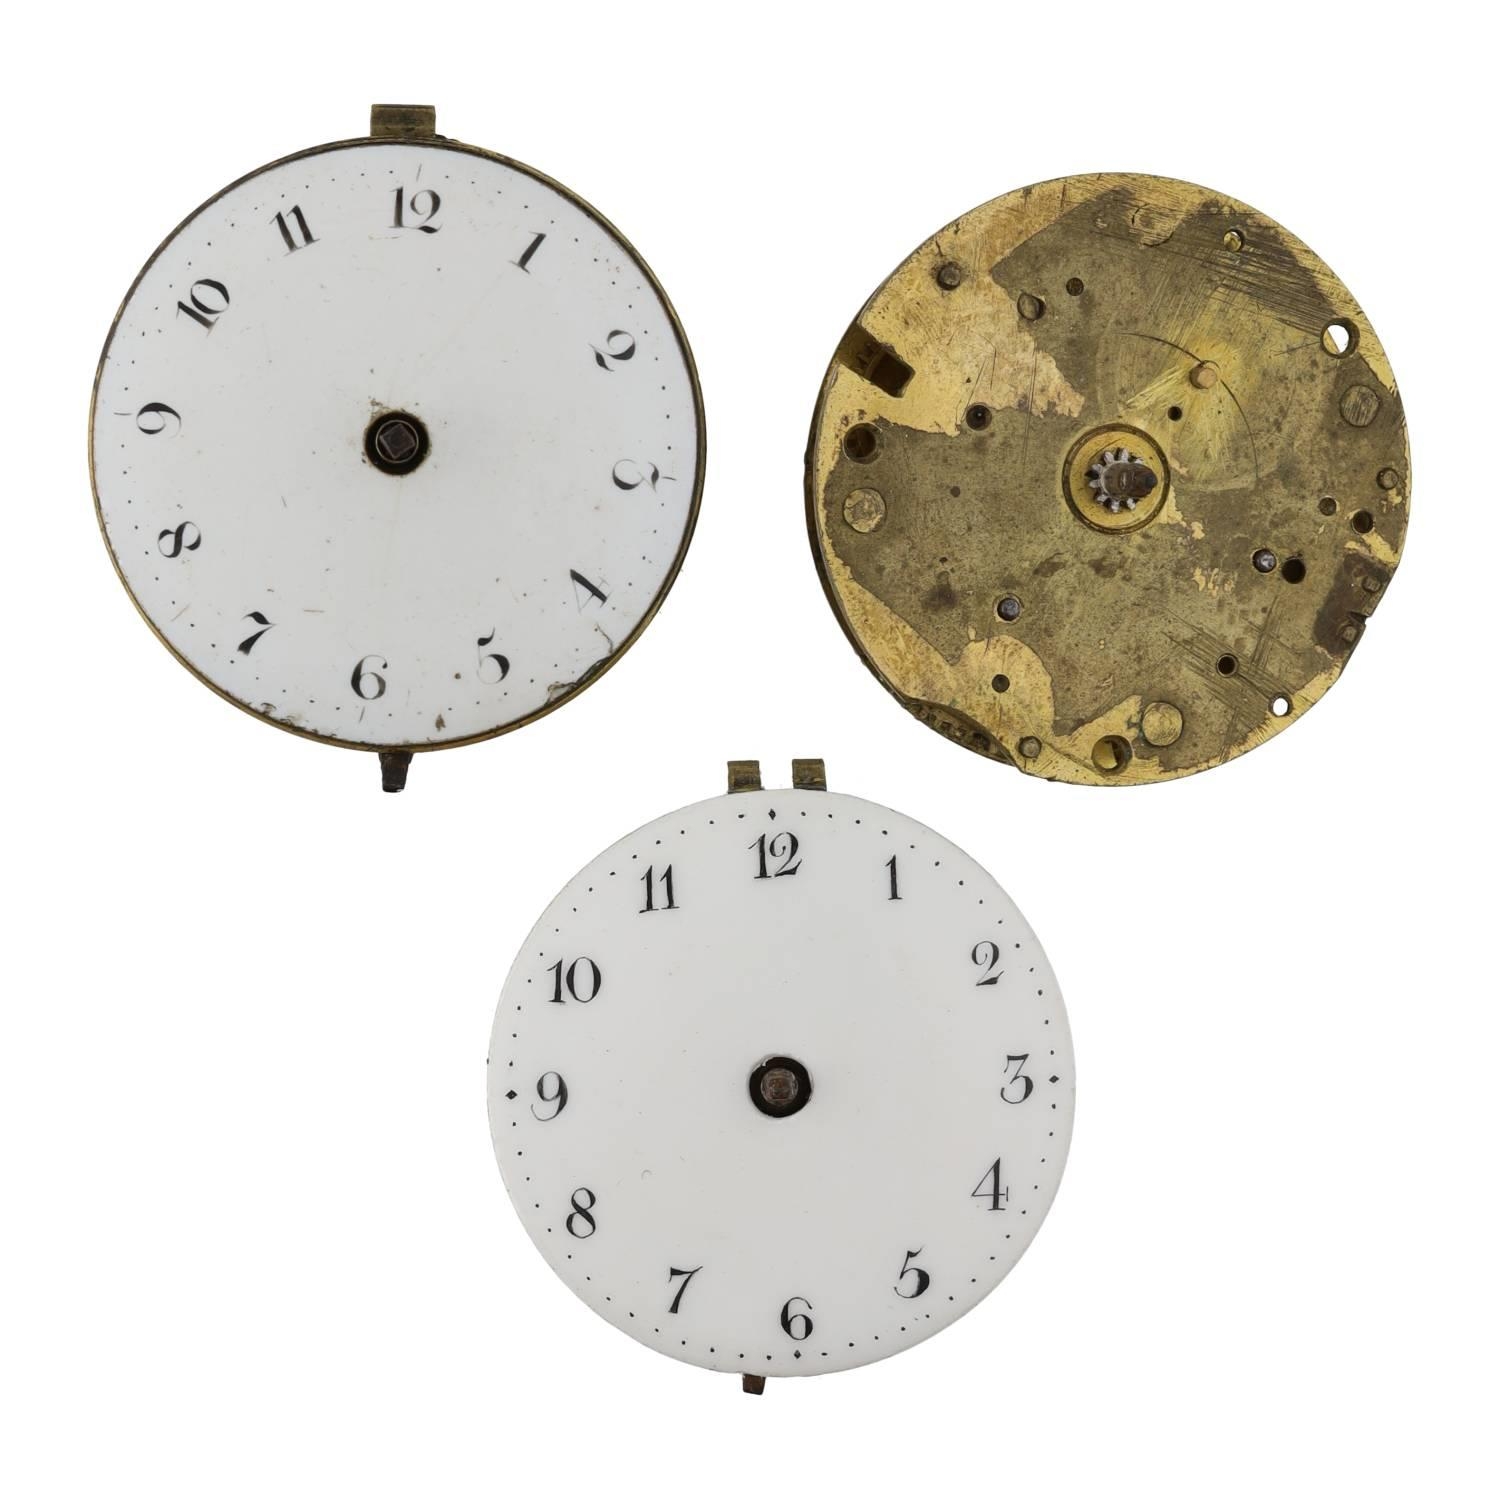 Three fusee verge pocket watch movements for repair, makers Jas Smith, London; Thos Winler, - Image 2 of 2